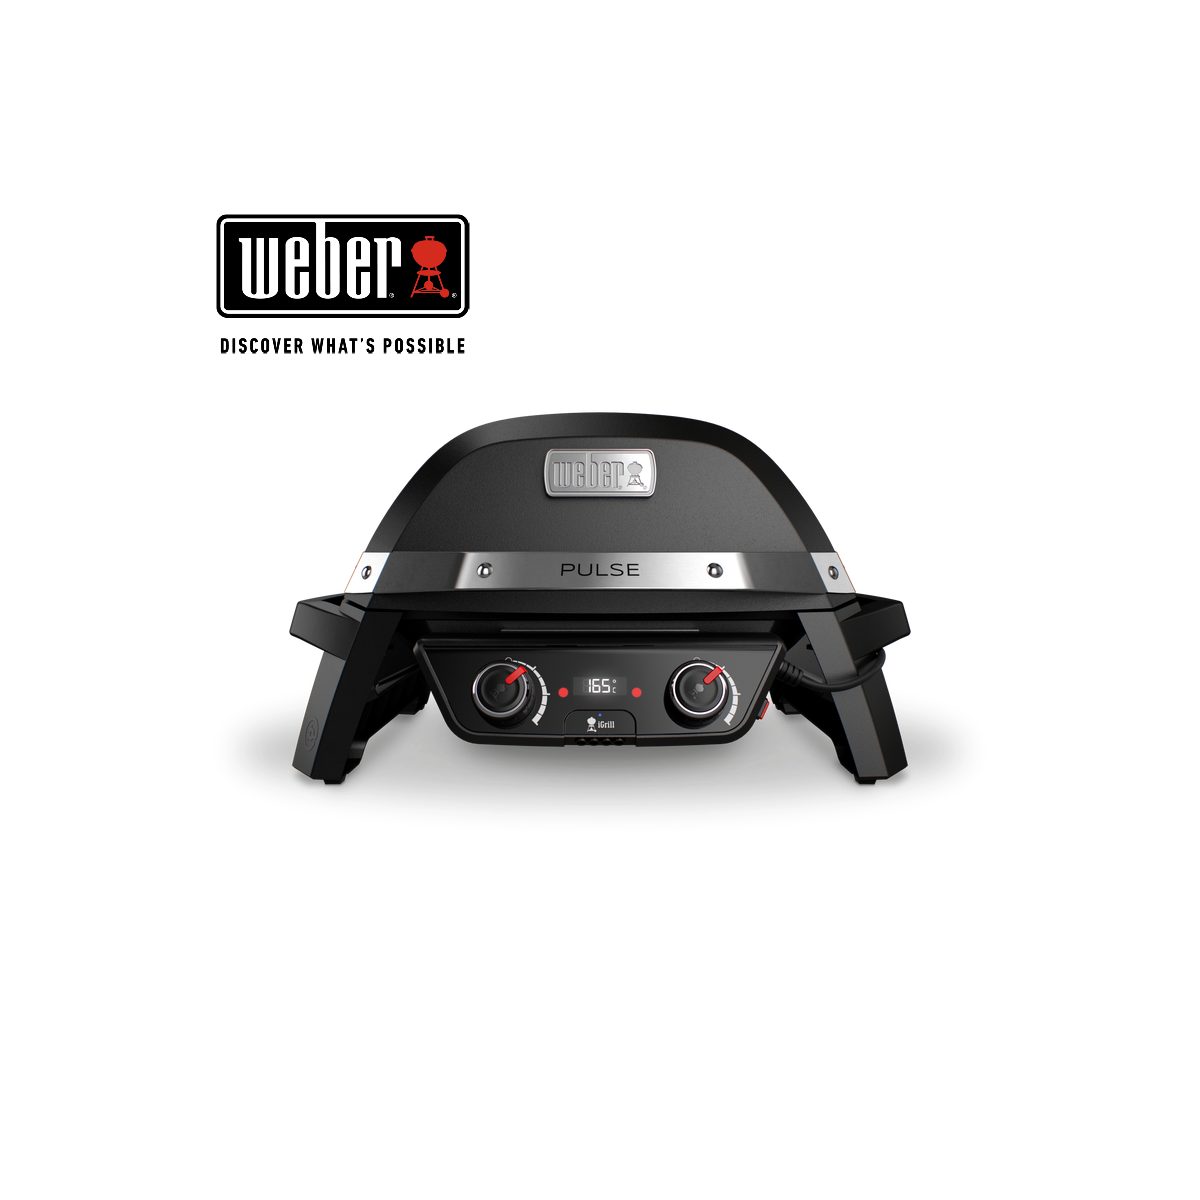 WEBER electric grill PULSE 2000, 82010069